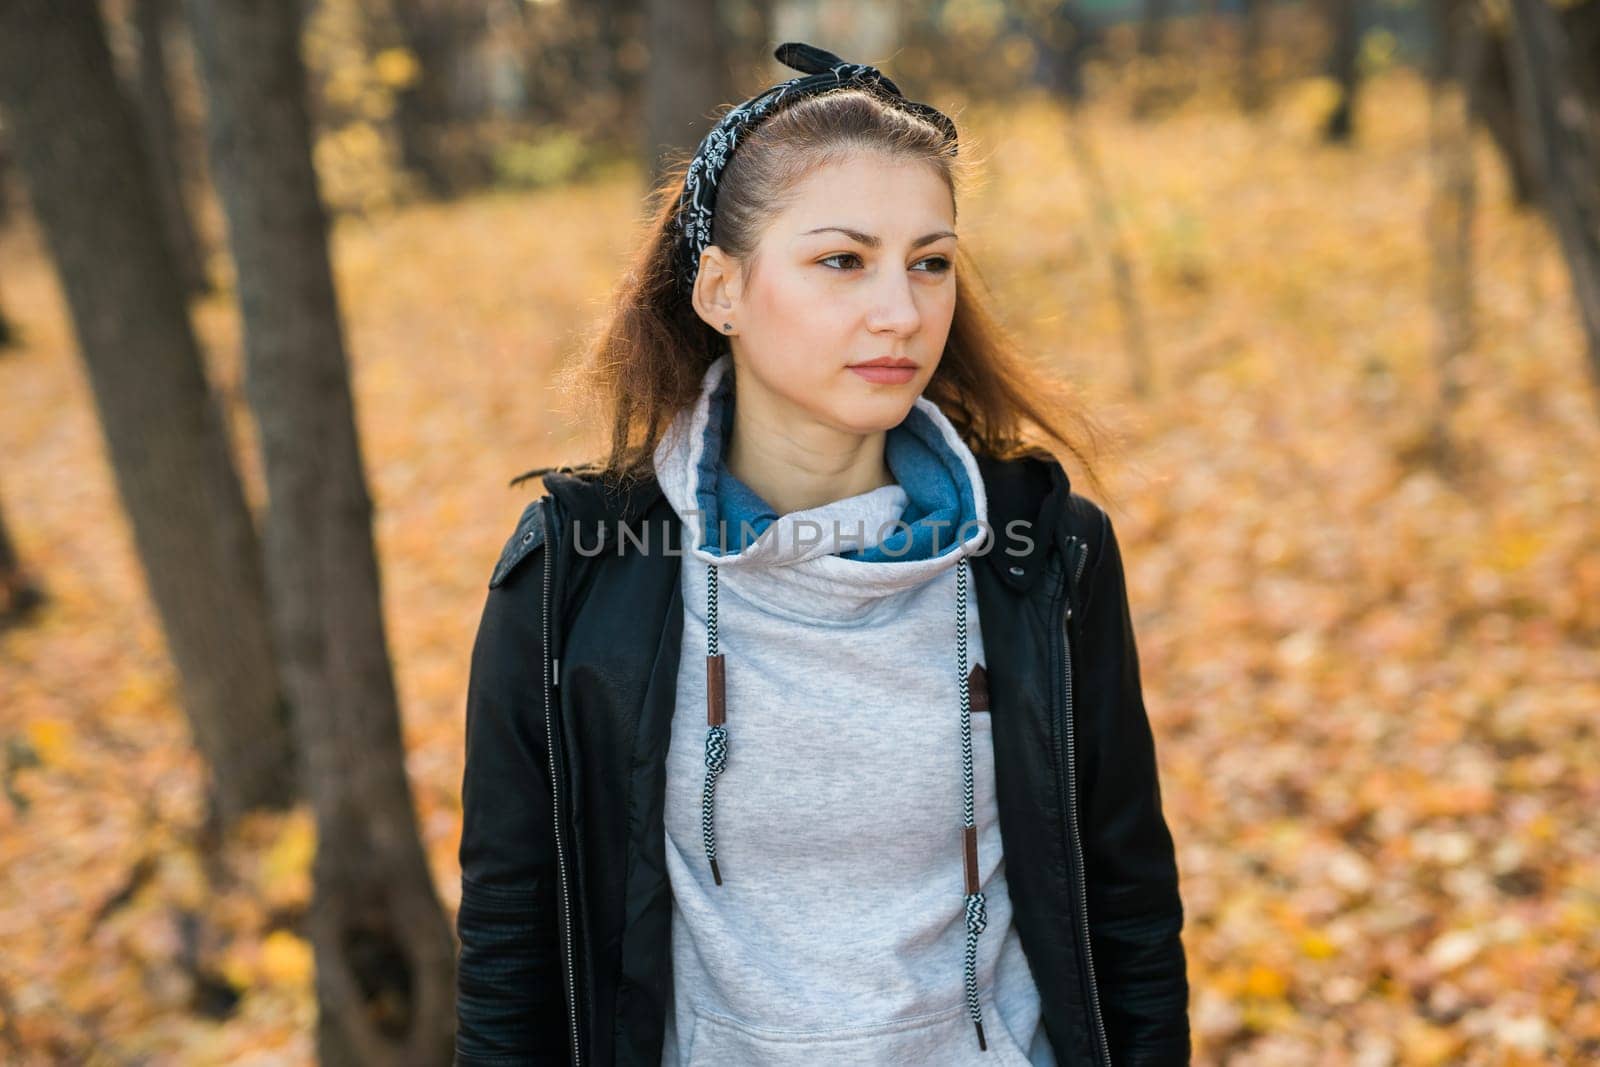 Outdoor atmospheric lifestyle portrait of young beautiful young woman. Warm autumn fall season by Satura86